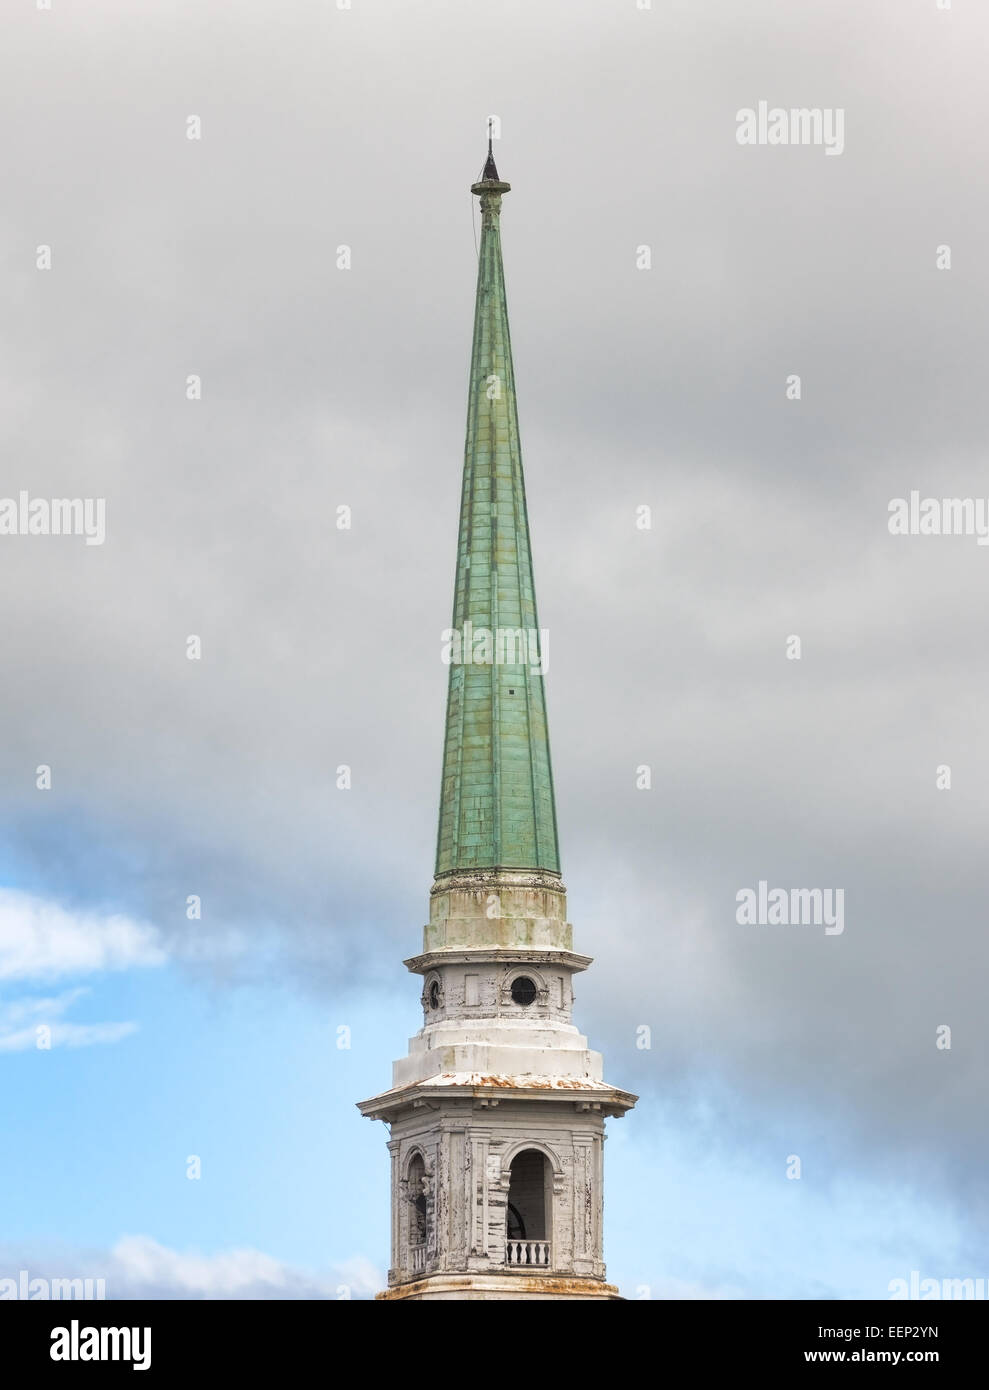 An old metal covered church spire in the foreground with clouds and sky in the background. Stock Photo